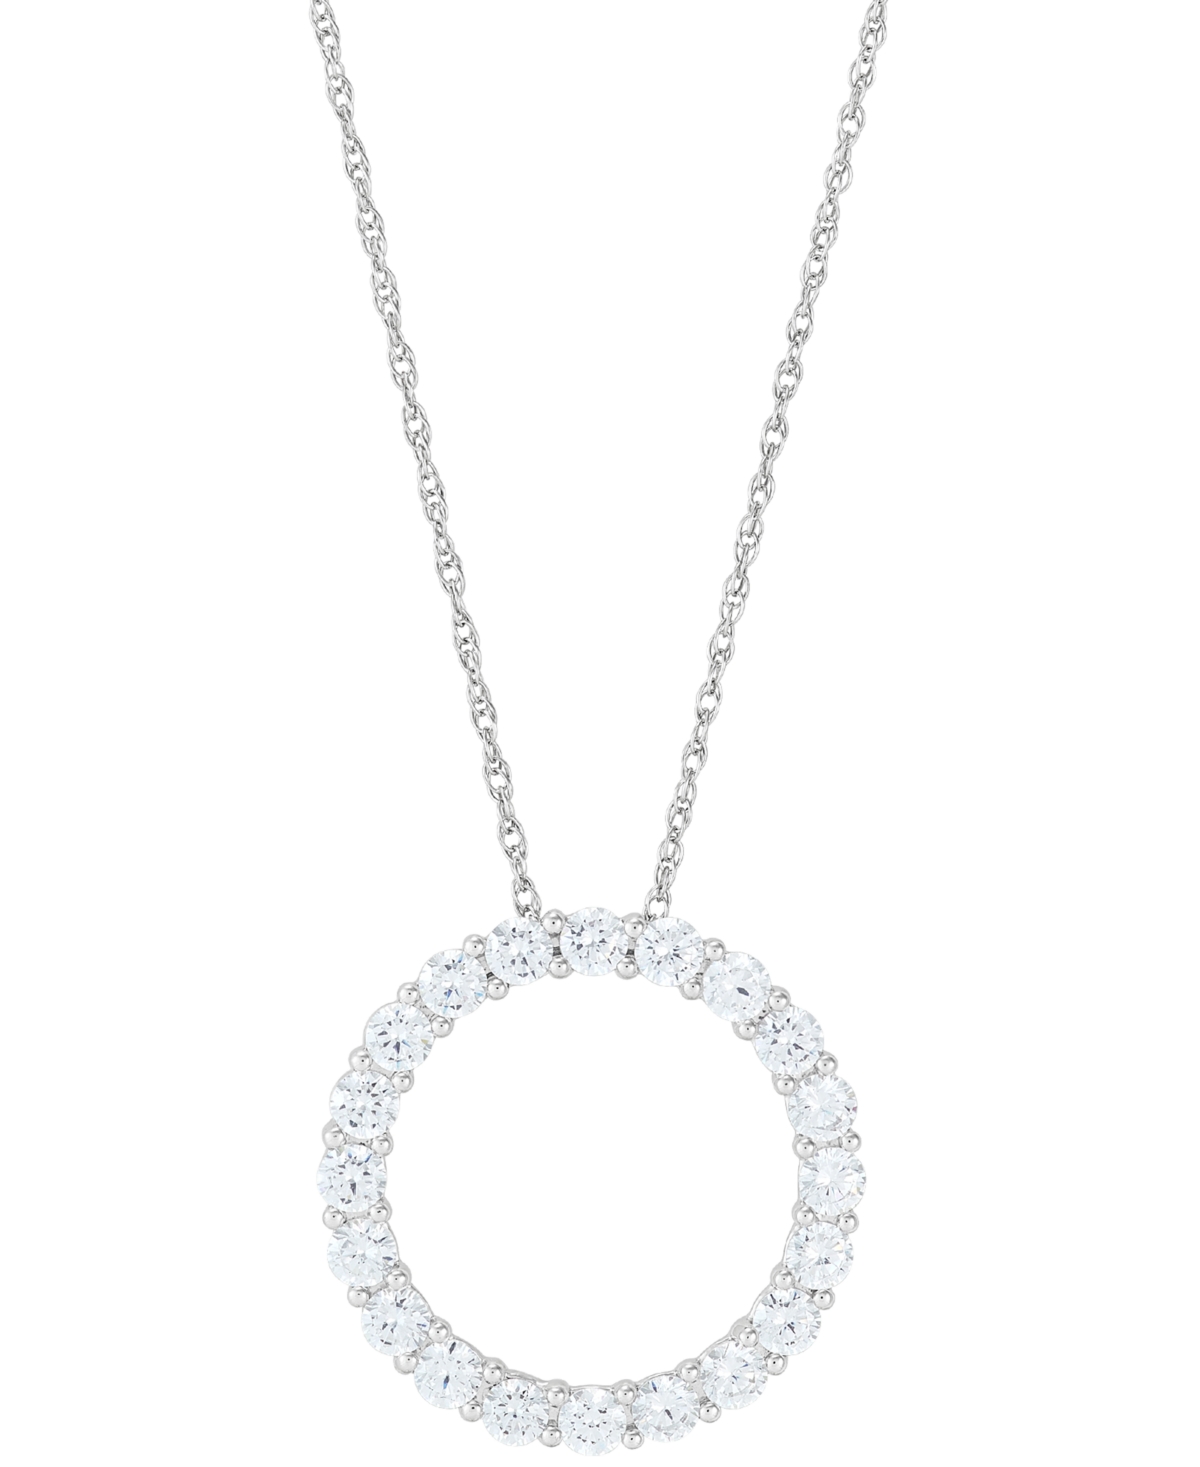 Grown With Love Lab Grown Diamond Circle Pendant Necklace (2 ct. t.w.) in 14k White Gold, 16" + 2" extender